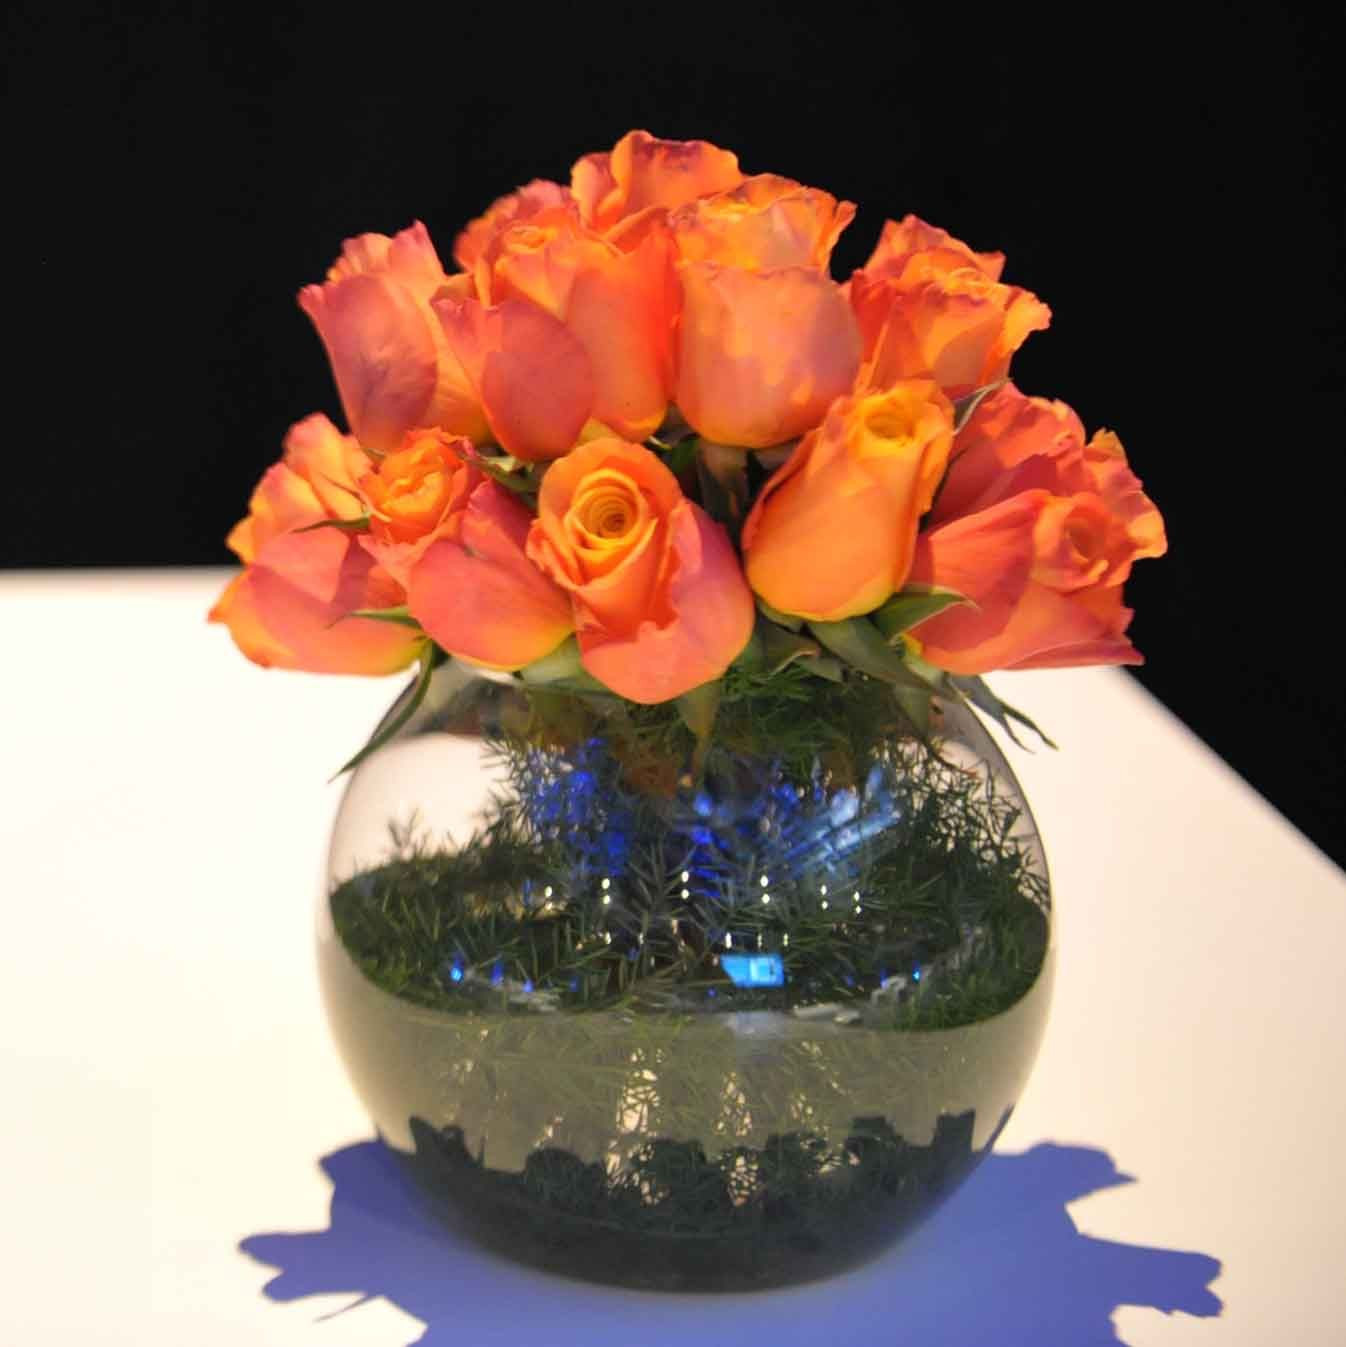 14 Cute Vintage Rose Bowl Vase 2024 free download vintage rose bowl vase of orange glass vase image 8 od orange rose foliage lined gold fish within orange glass vase image 8 od orange rose foliage lined gold fish bowl of orange glass